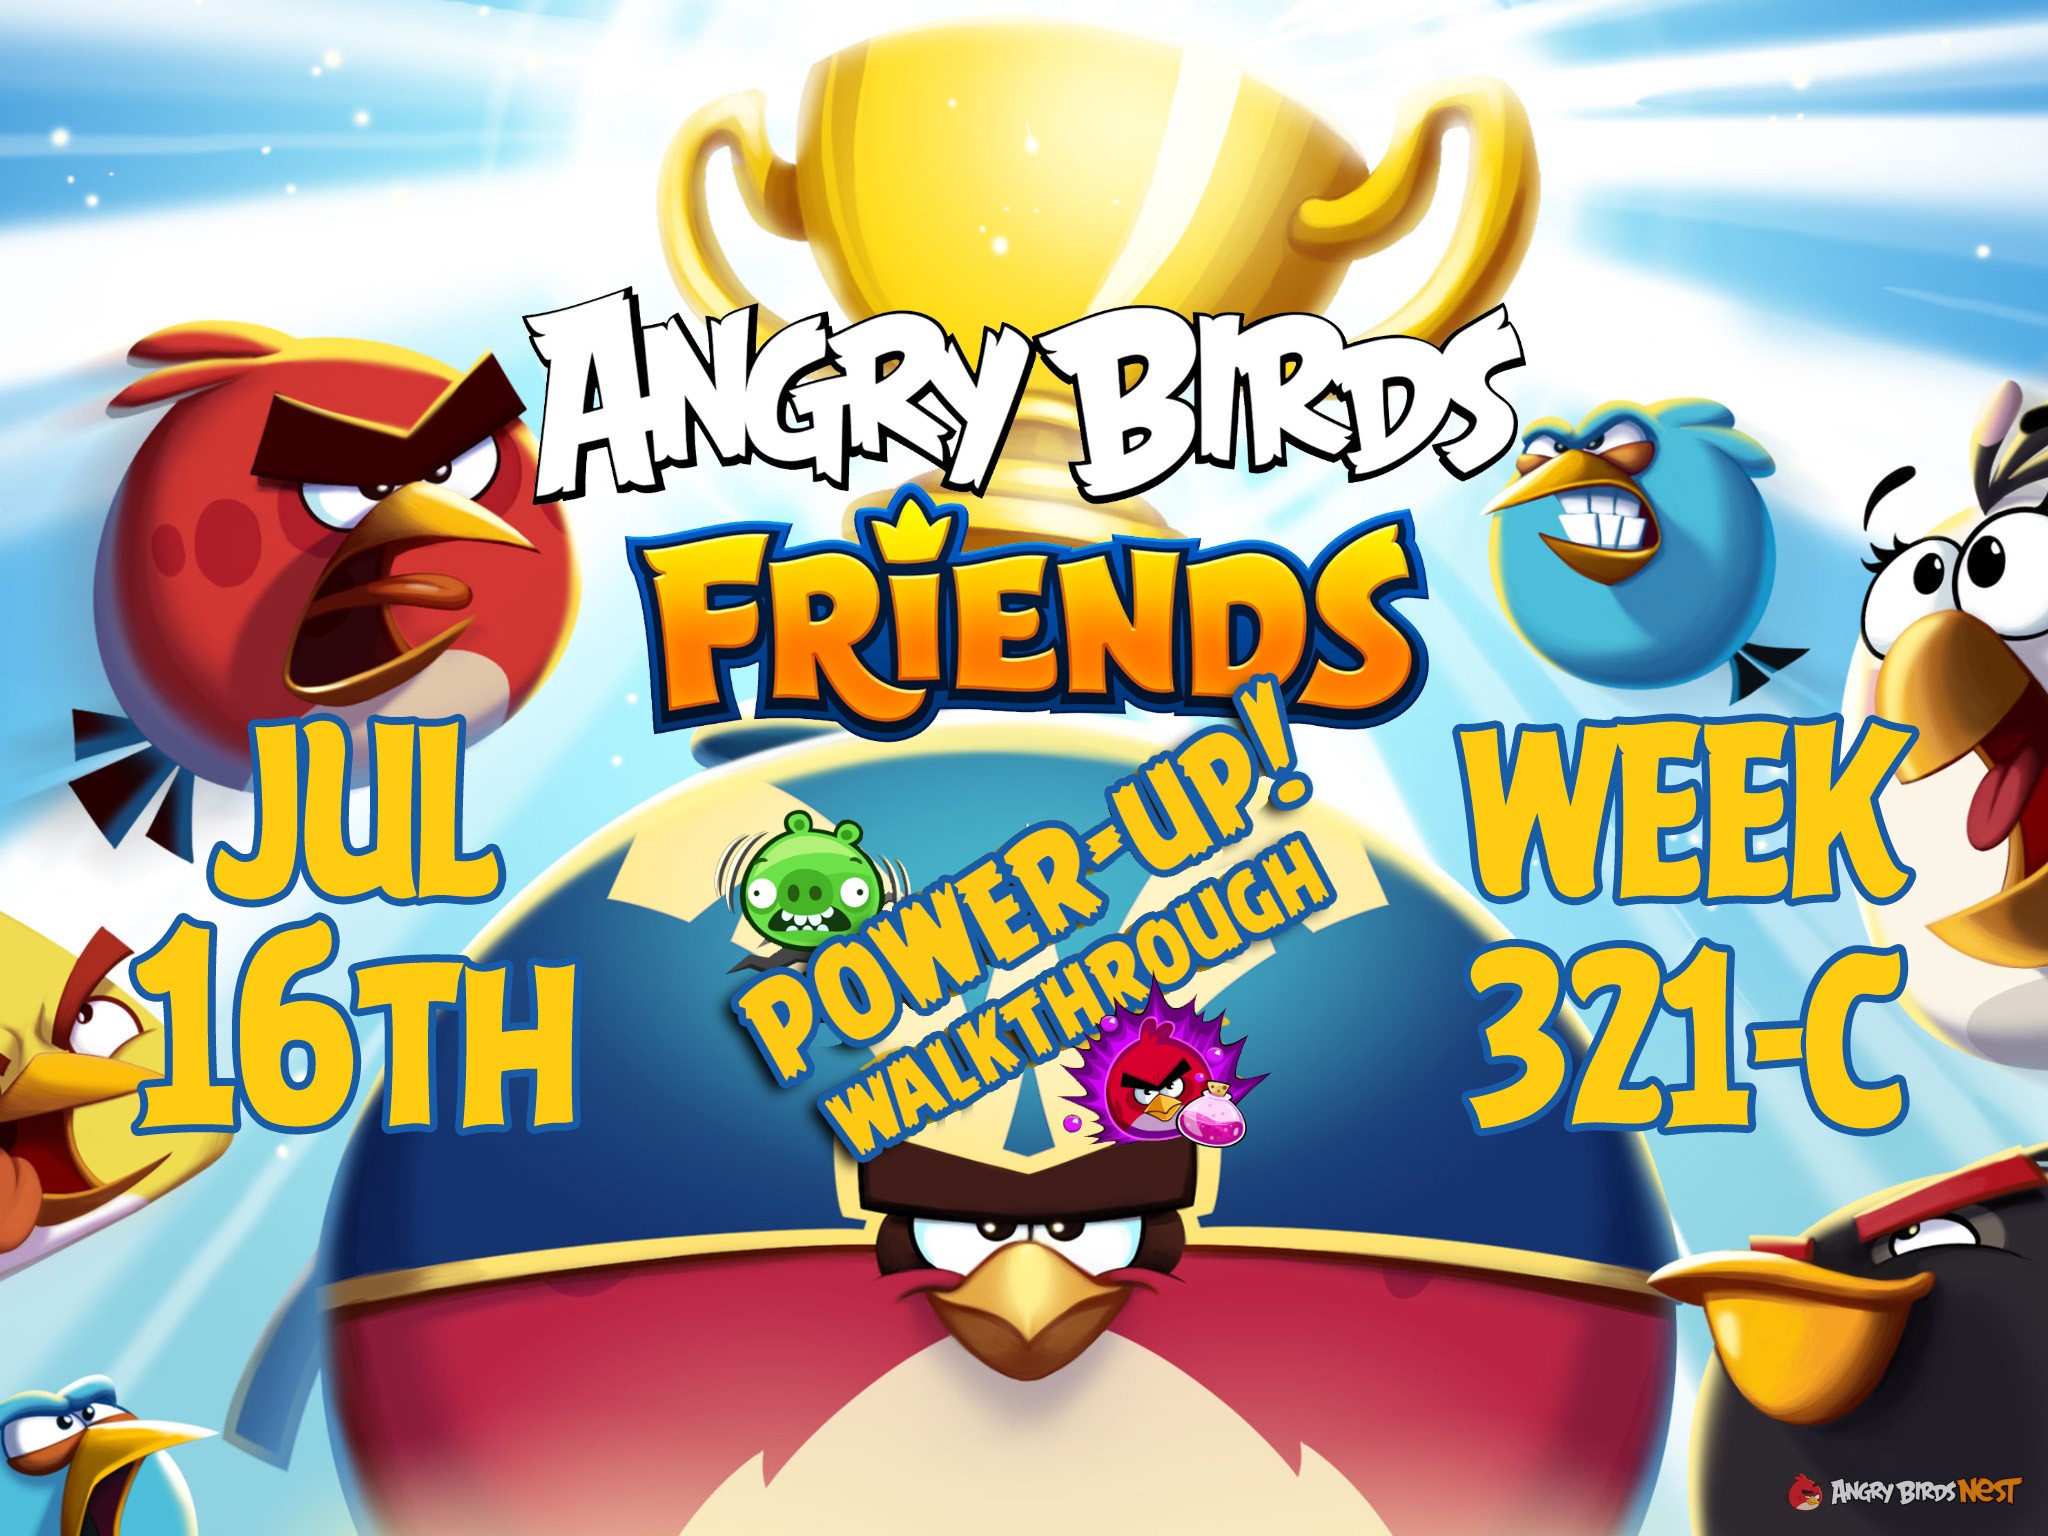 Angry-Birds-Friends-Tournament-Week-321-C-Feature-Image-PU